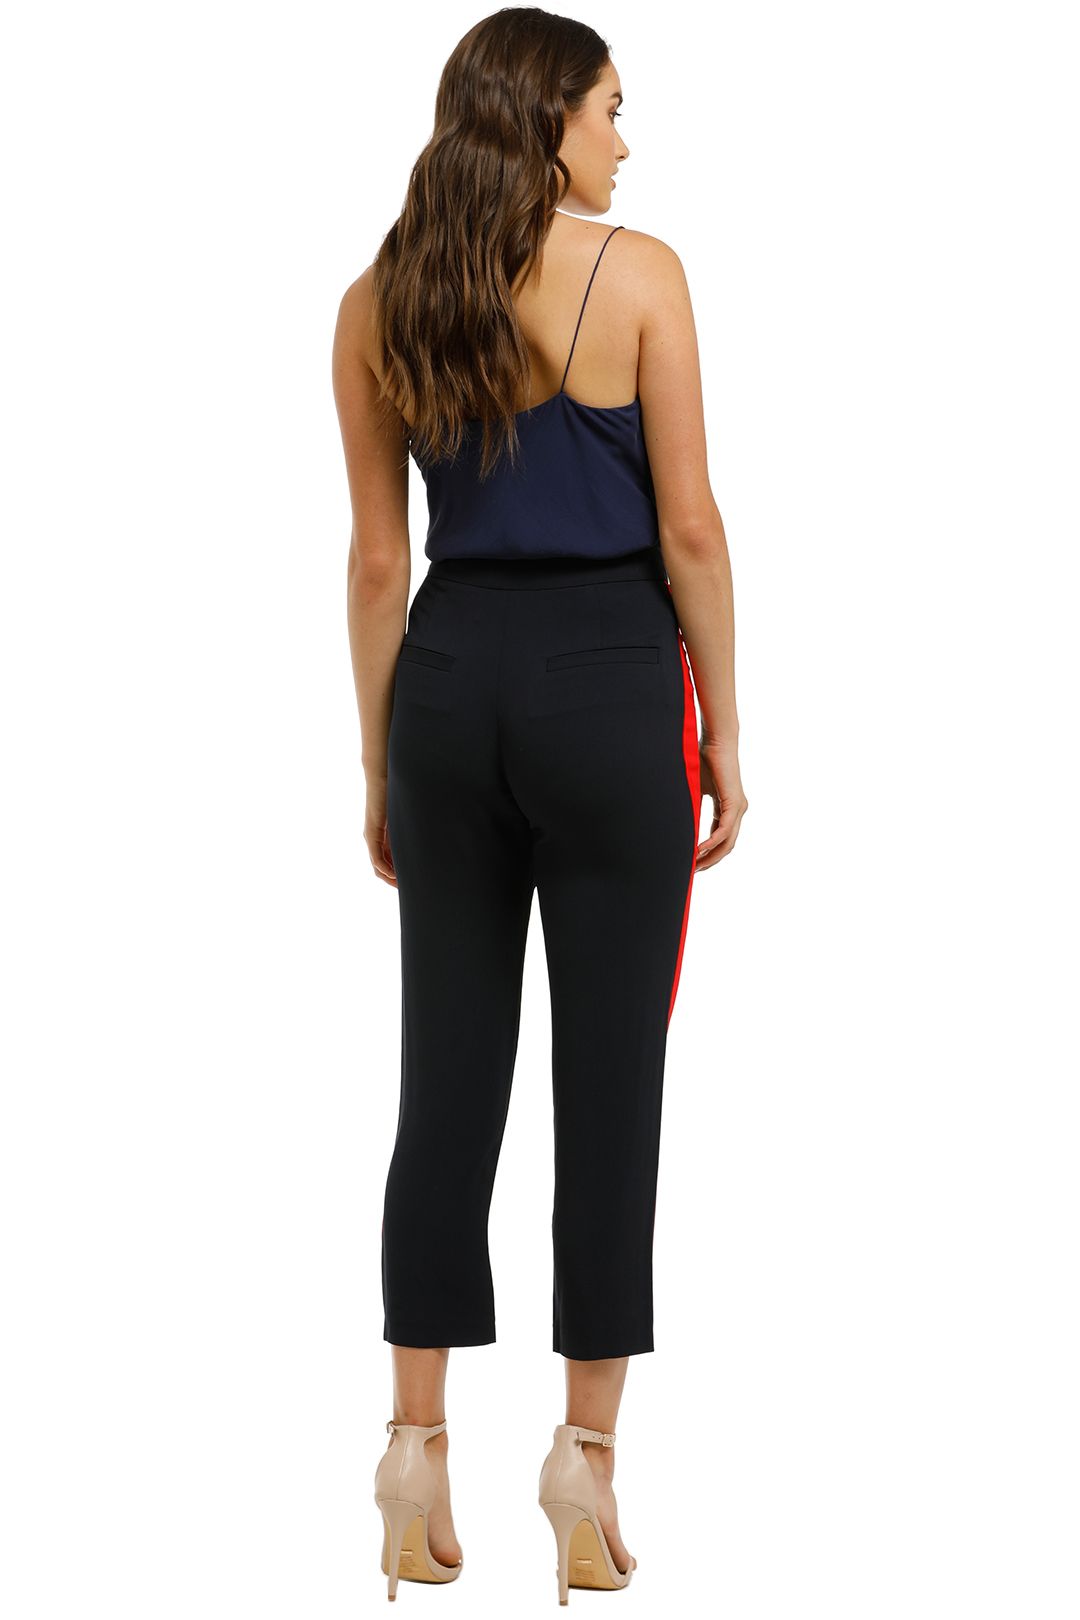 Ginger-and-Smart-Illicit-Pant-Navy-Red-Apple-Back